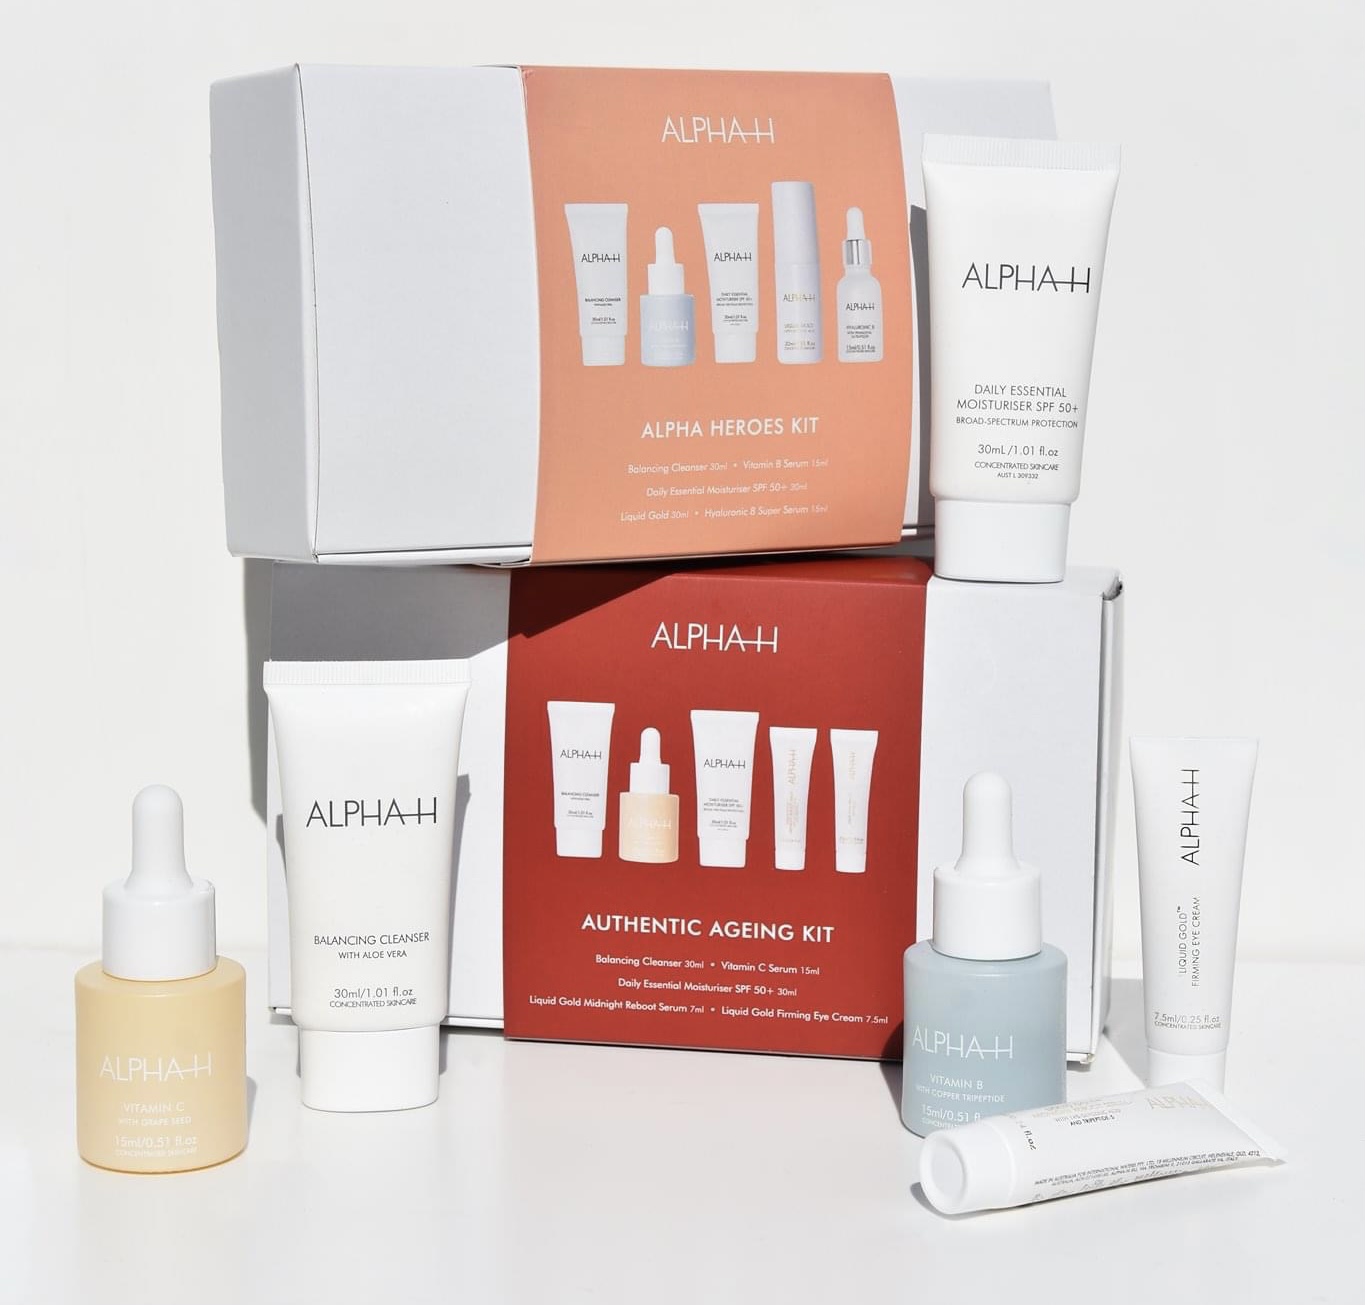 ALPHA-H Authentic Ageing Kit